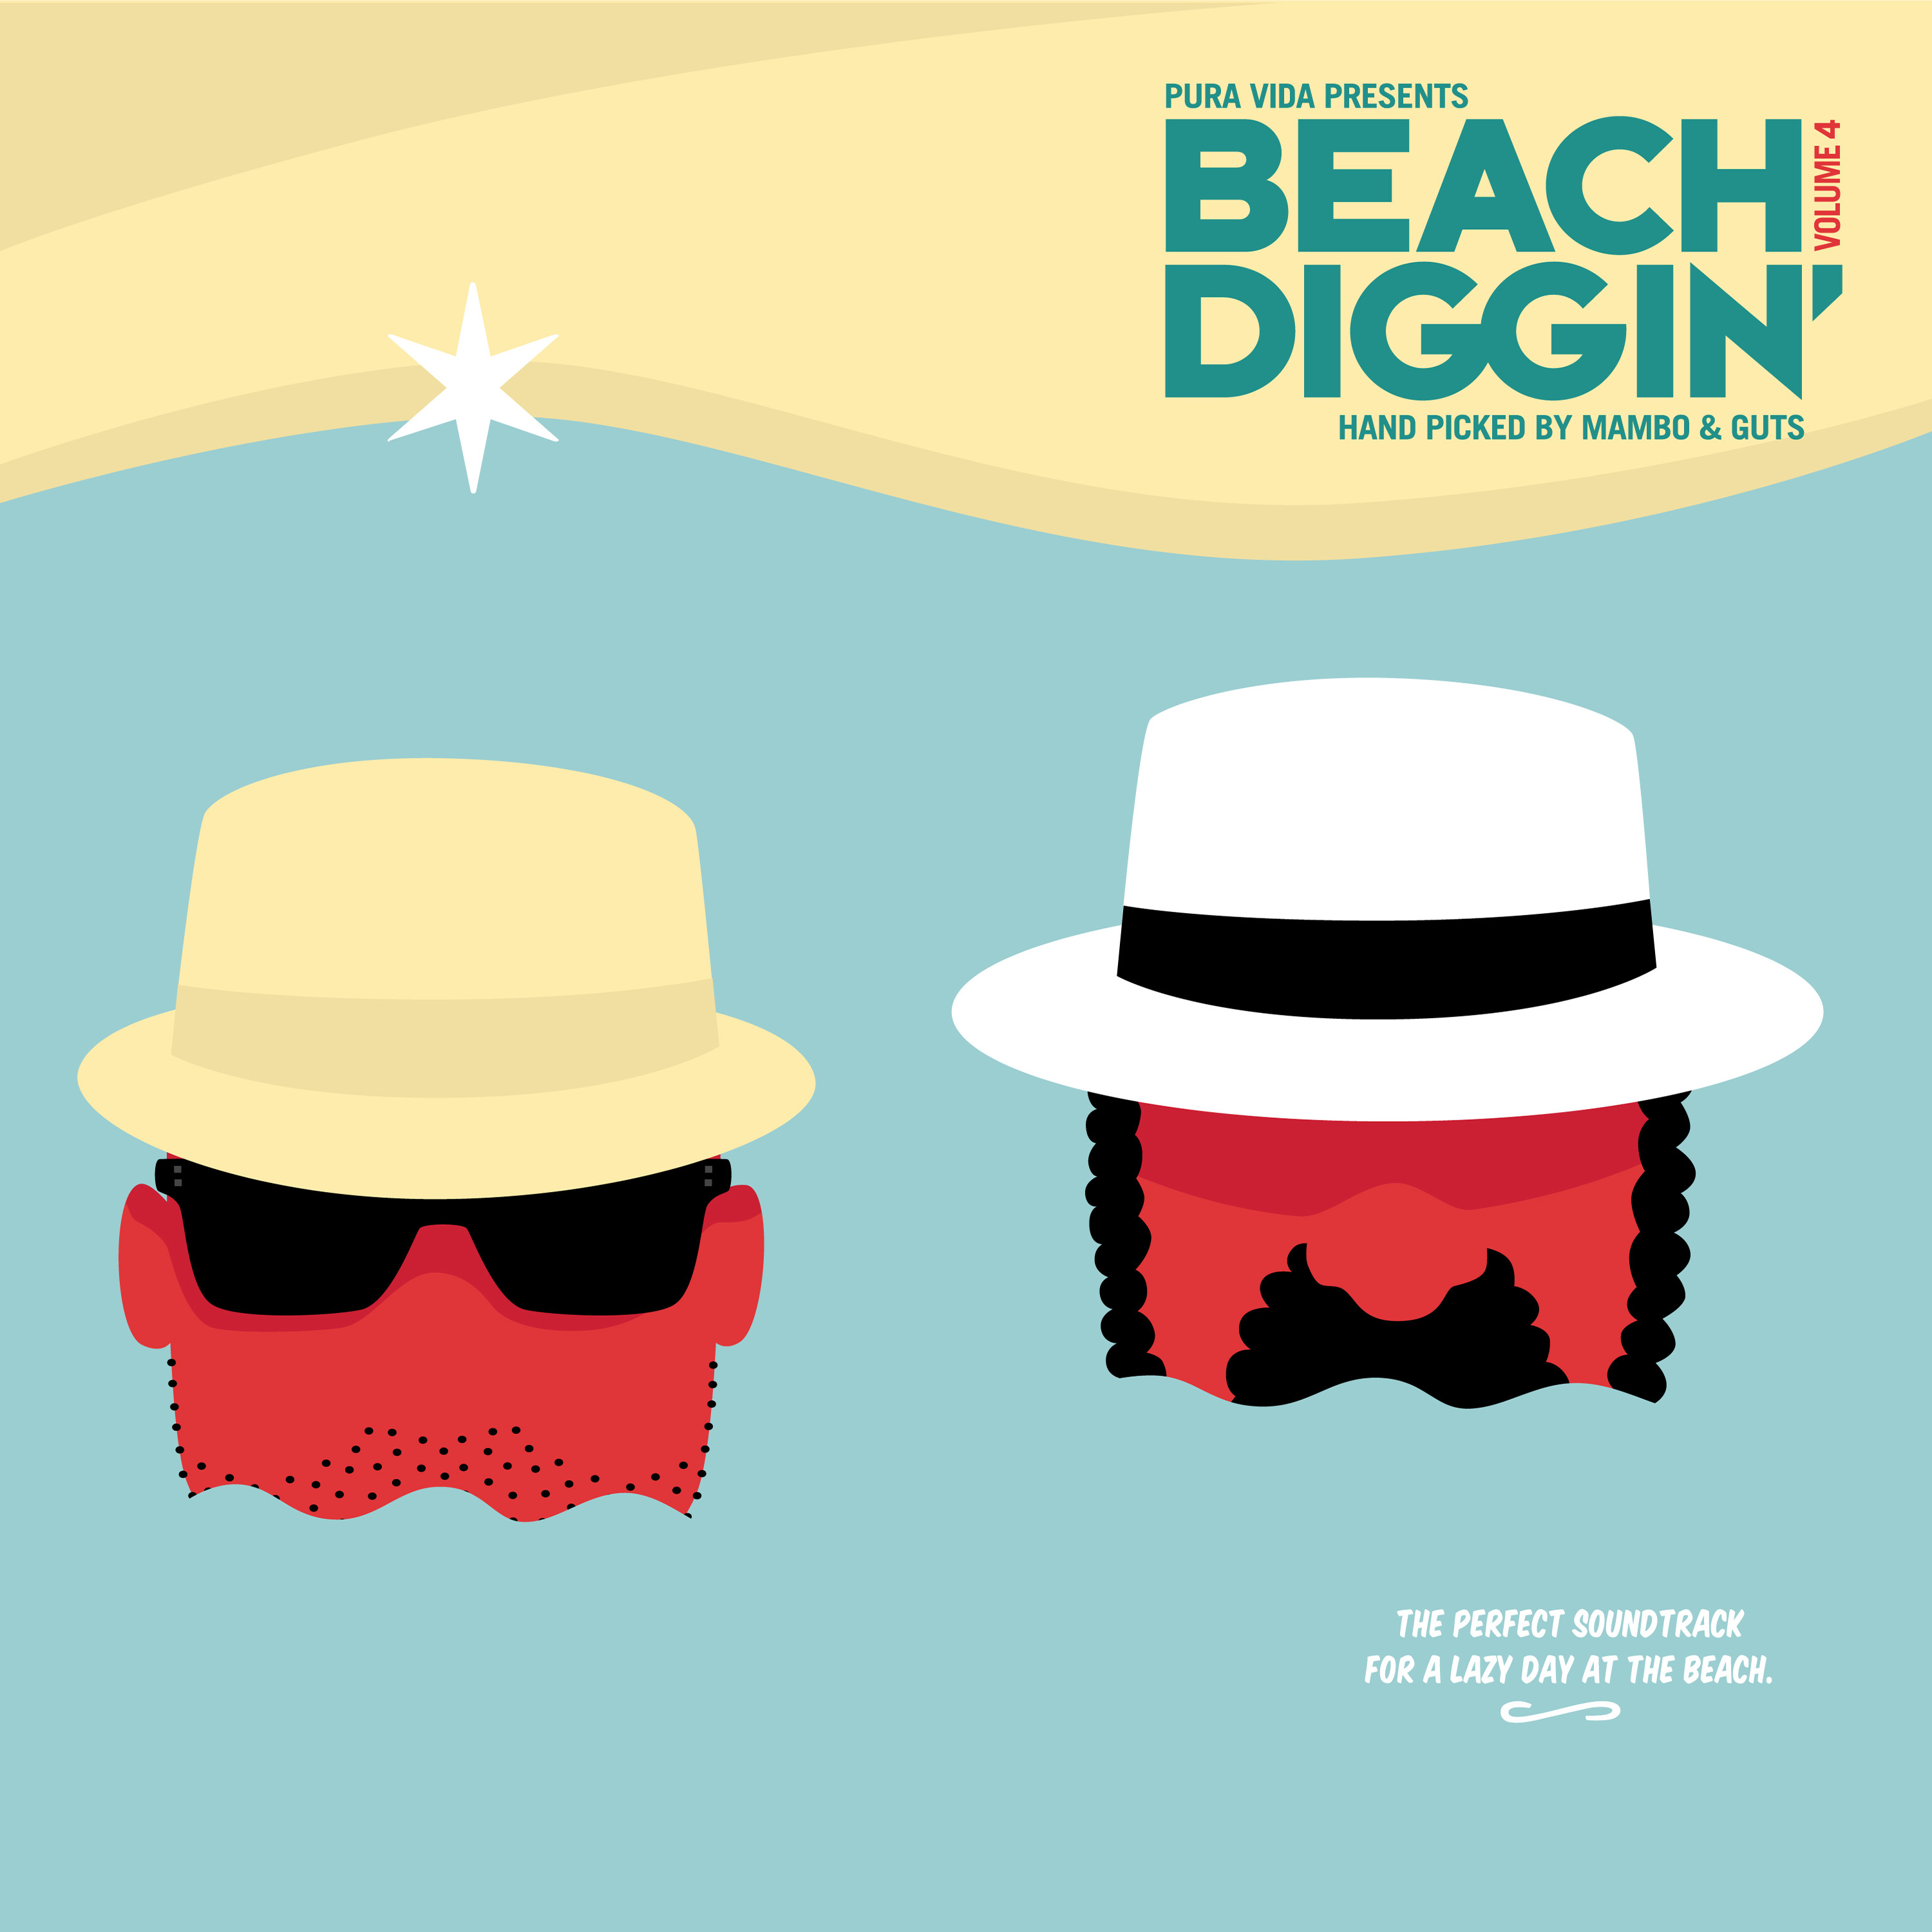 Beach Diggin’ – The perfect soundtrack for a lazy day at the beach with Guts & Mambo !